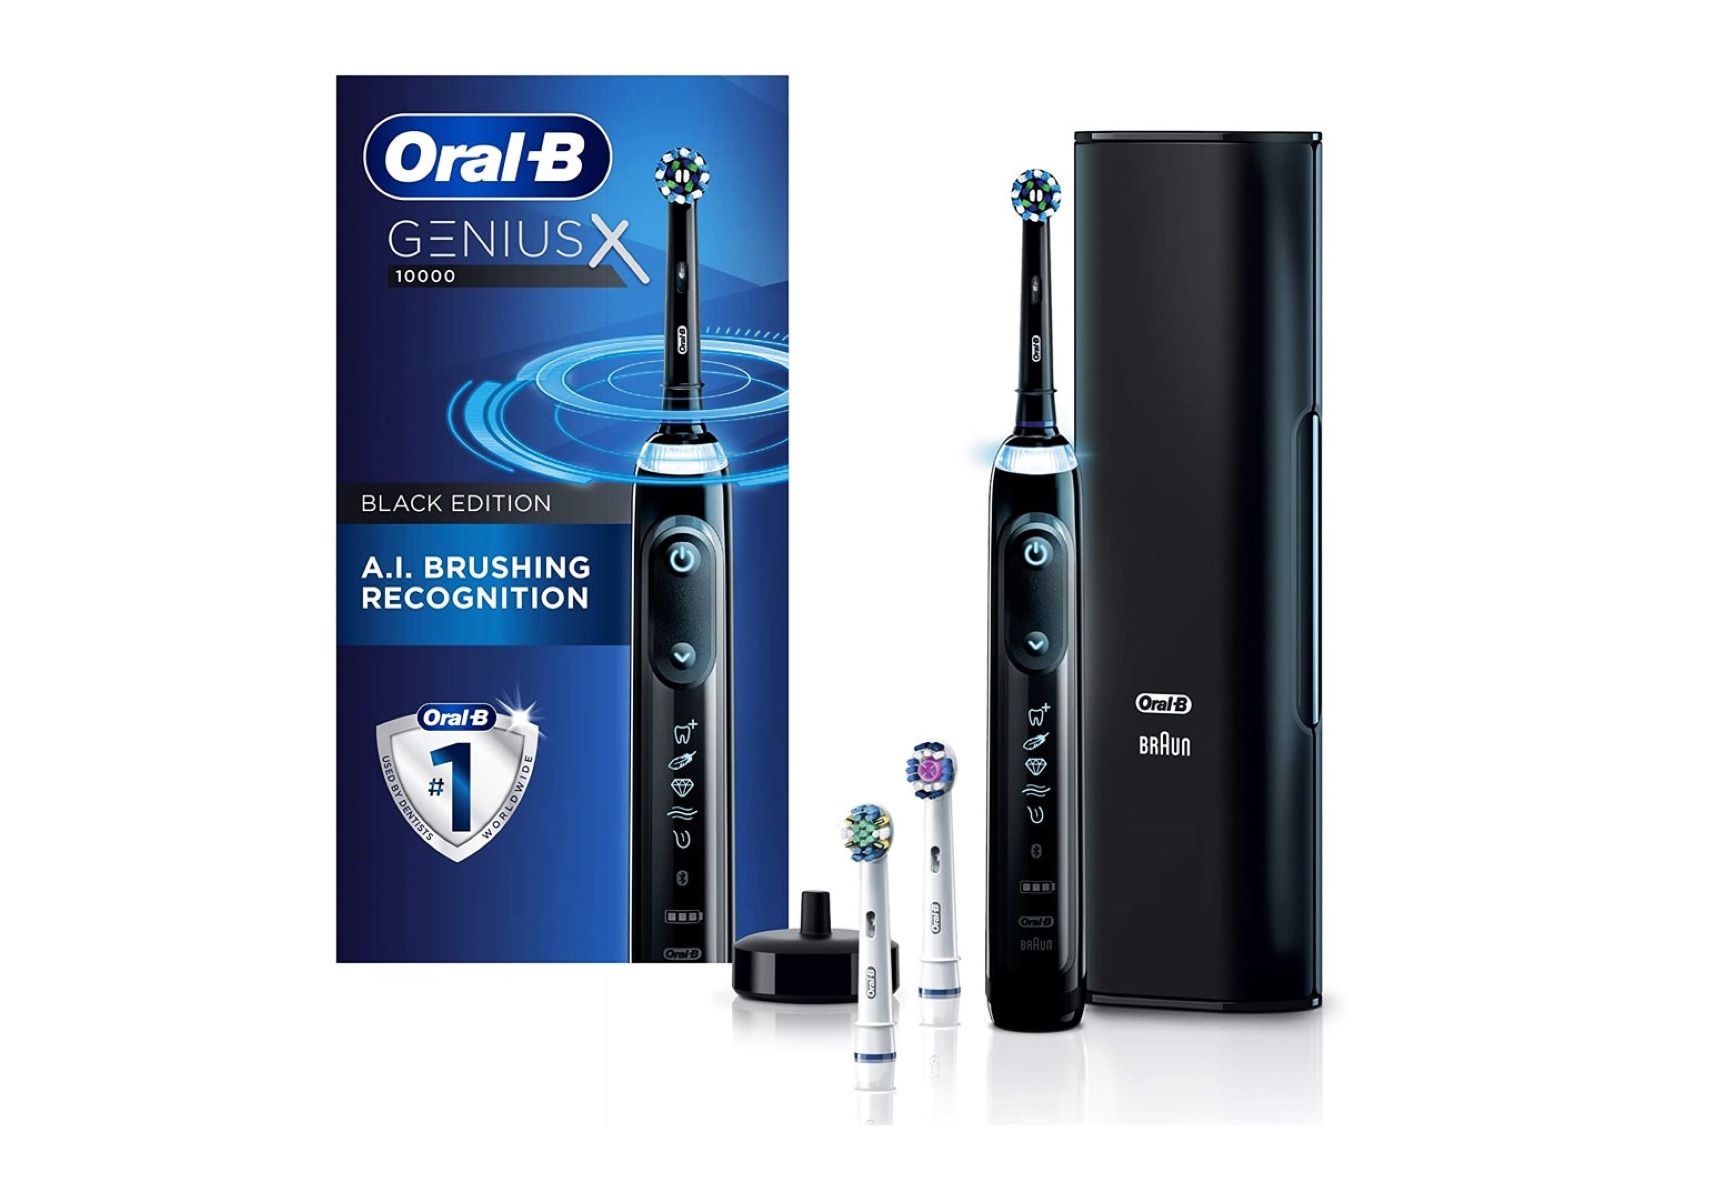 How To Connect Oral-B Toothbrush To Bluetooth